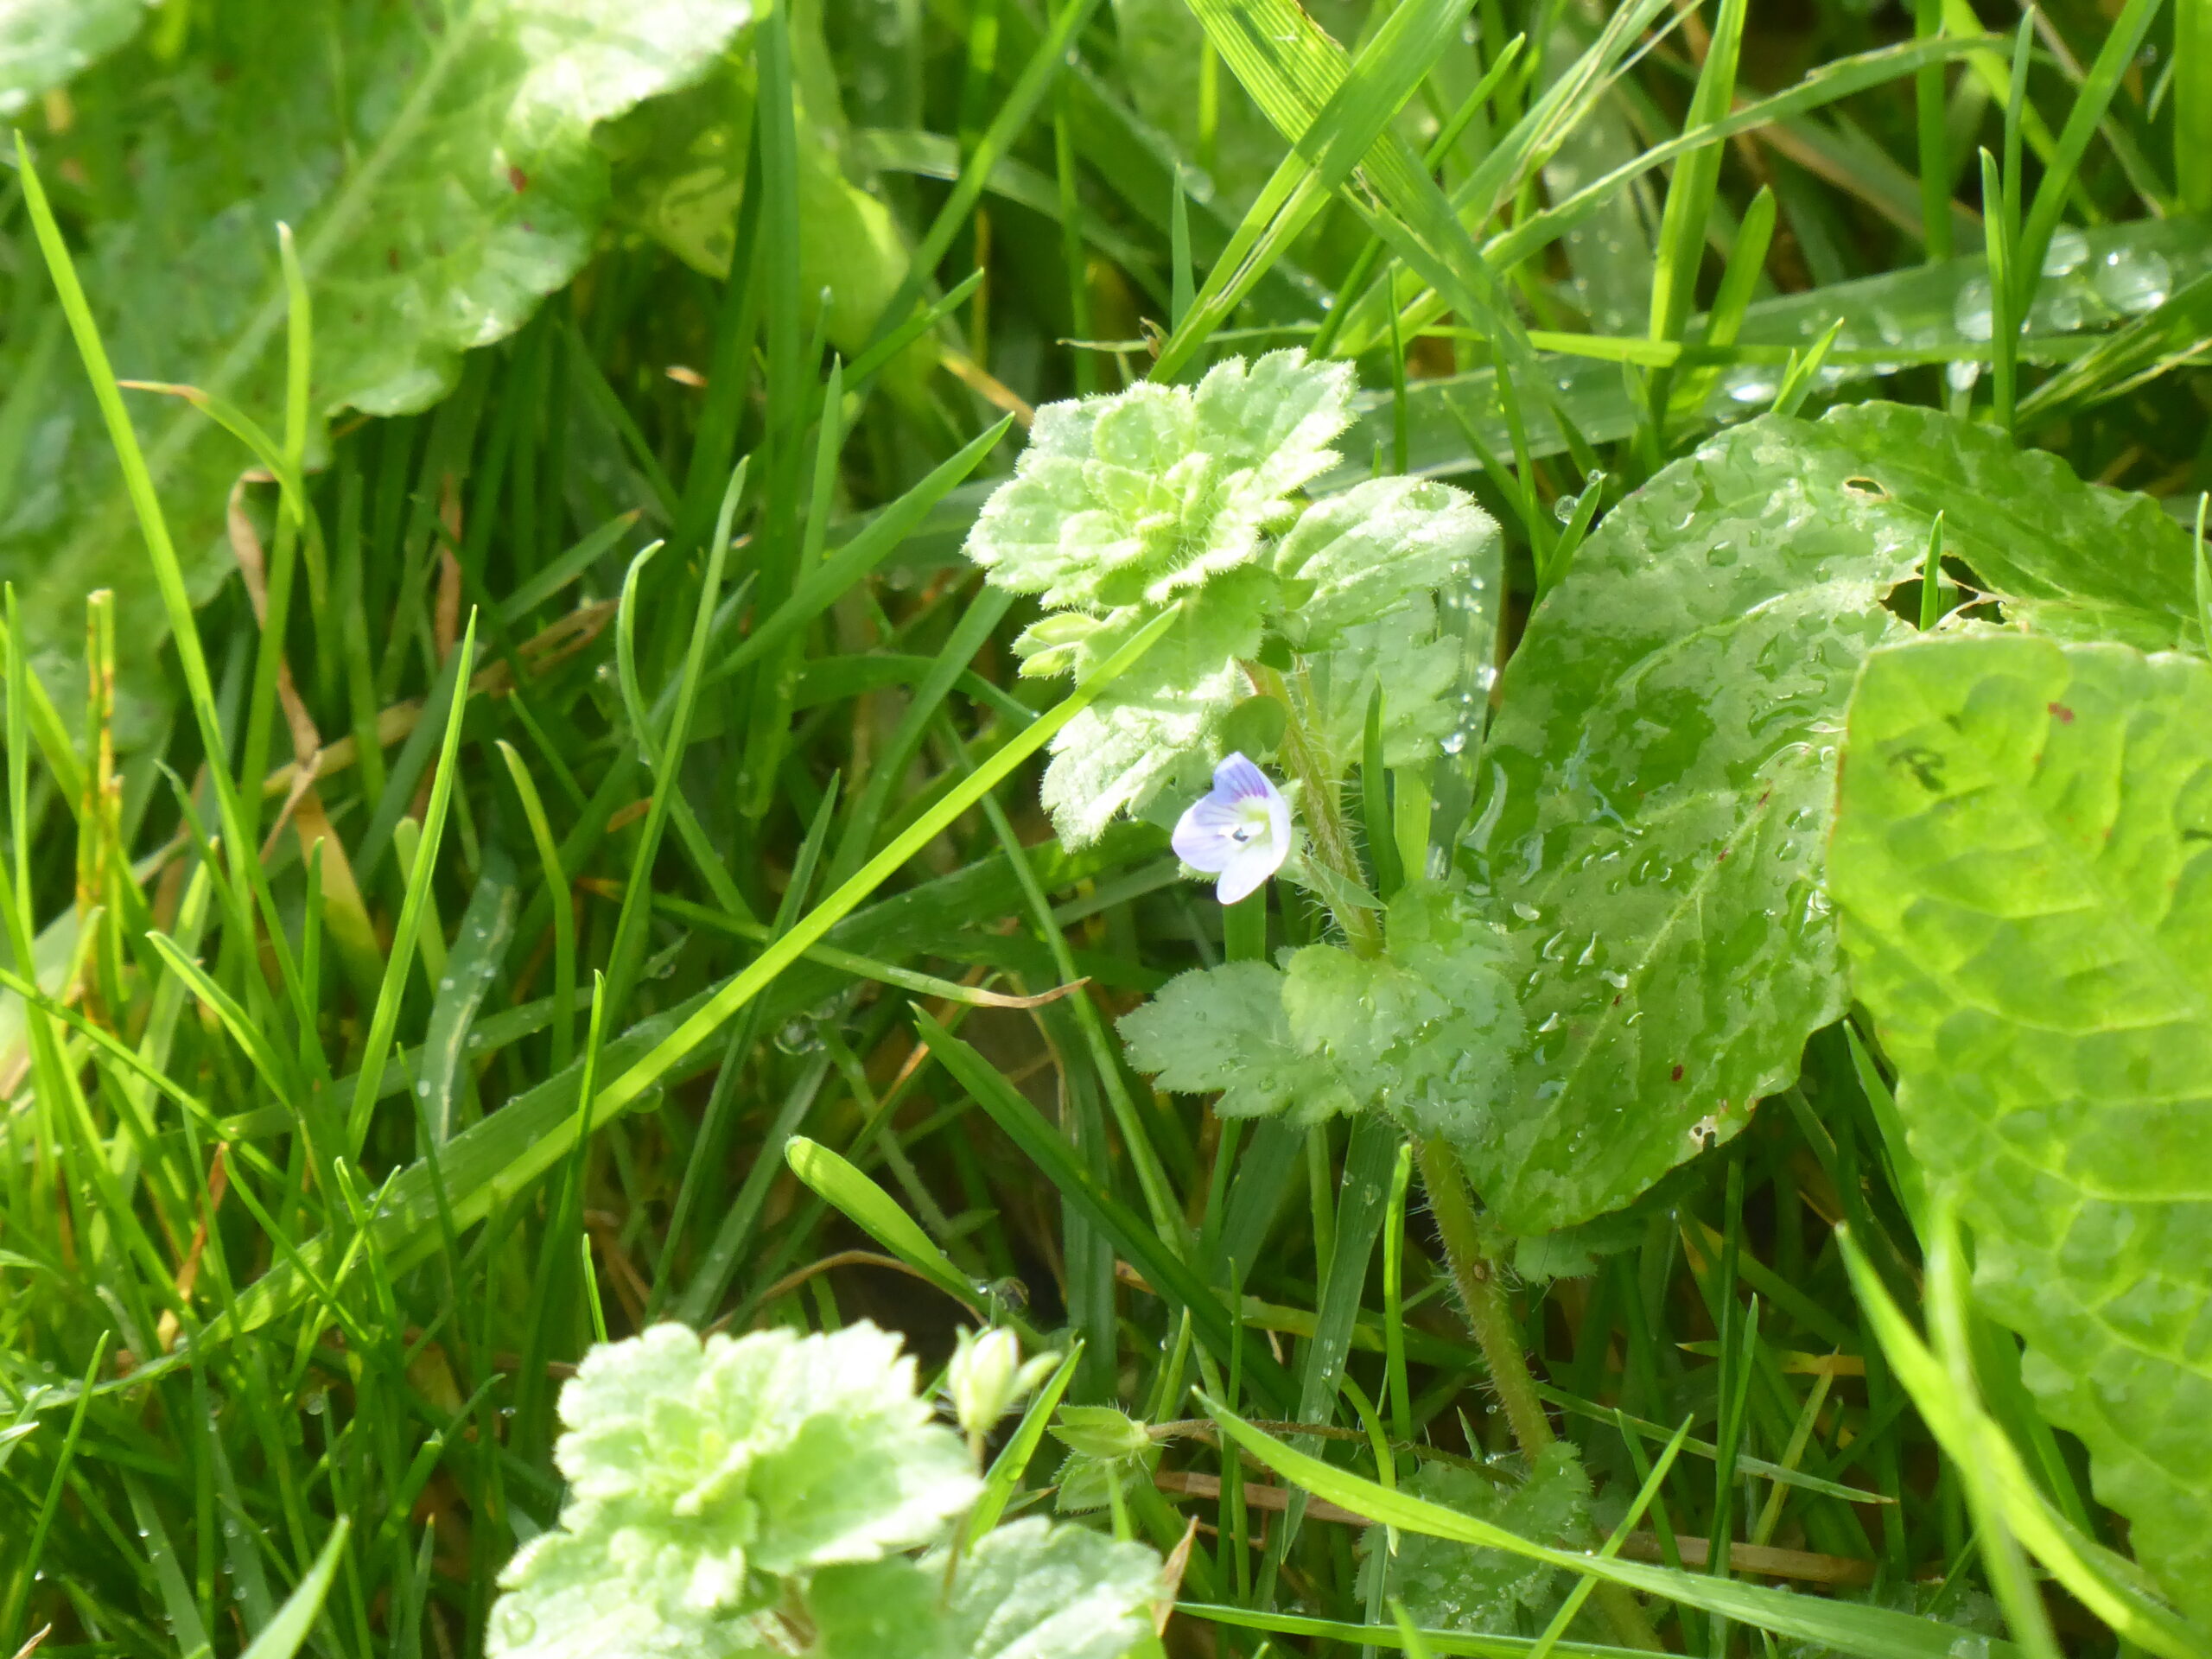 Common Field-speedwell (Veronica persica) and Thyme-leaved Speedwell (Veronica serpyllifolia)